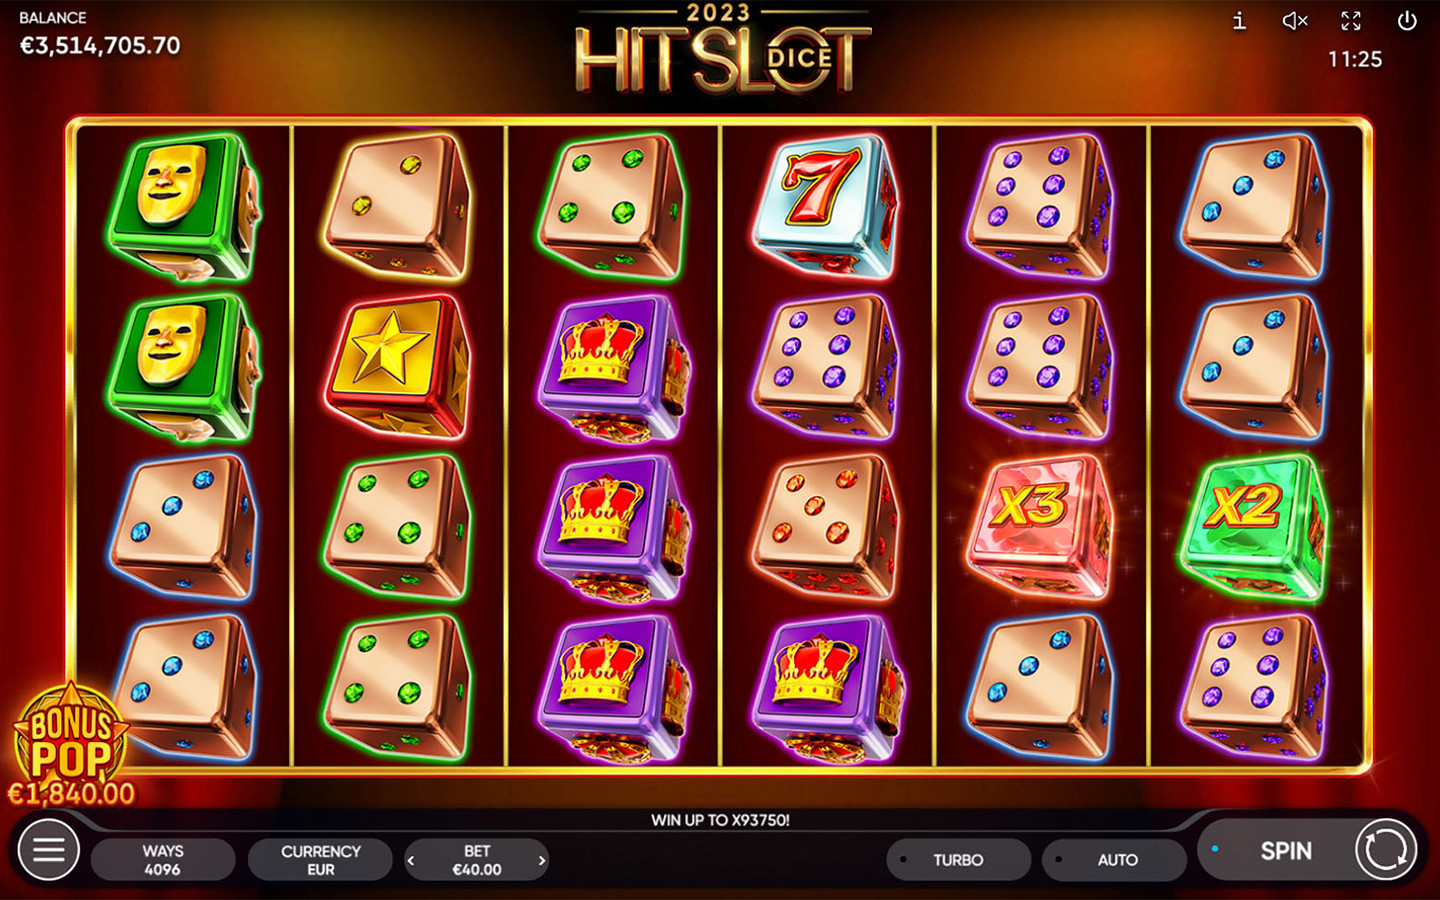 NEW ONLINE DICE SLOTS  | 2023 Hit Slot Dice is out now!